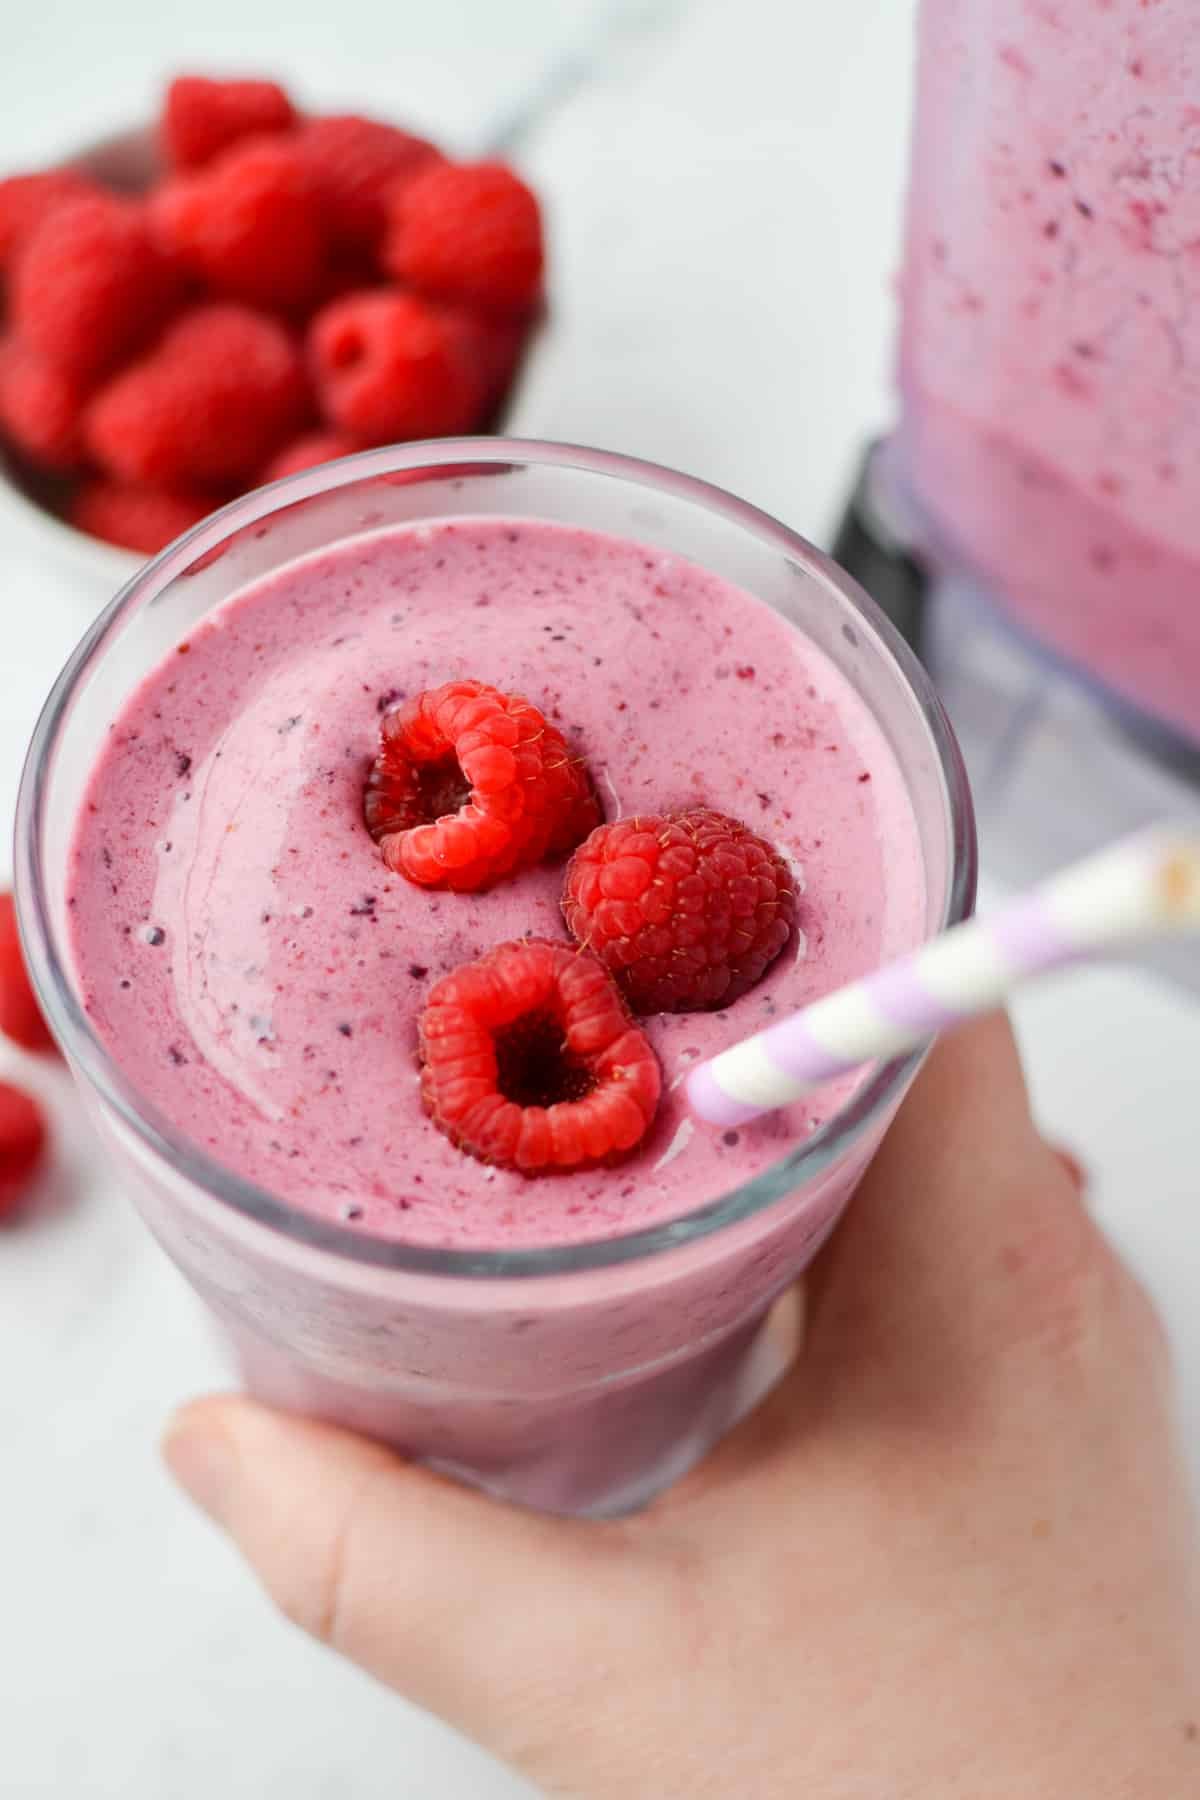 A hand taking a glass of blended fruit topped with raspberries.